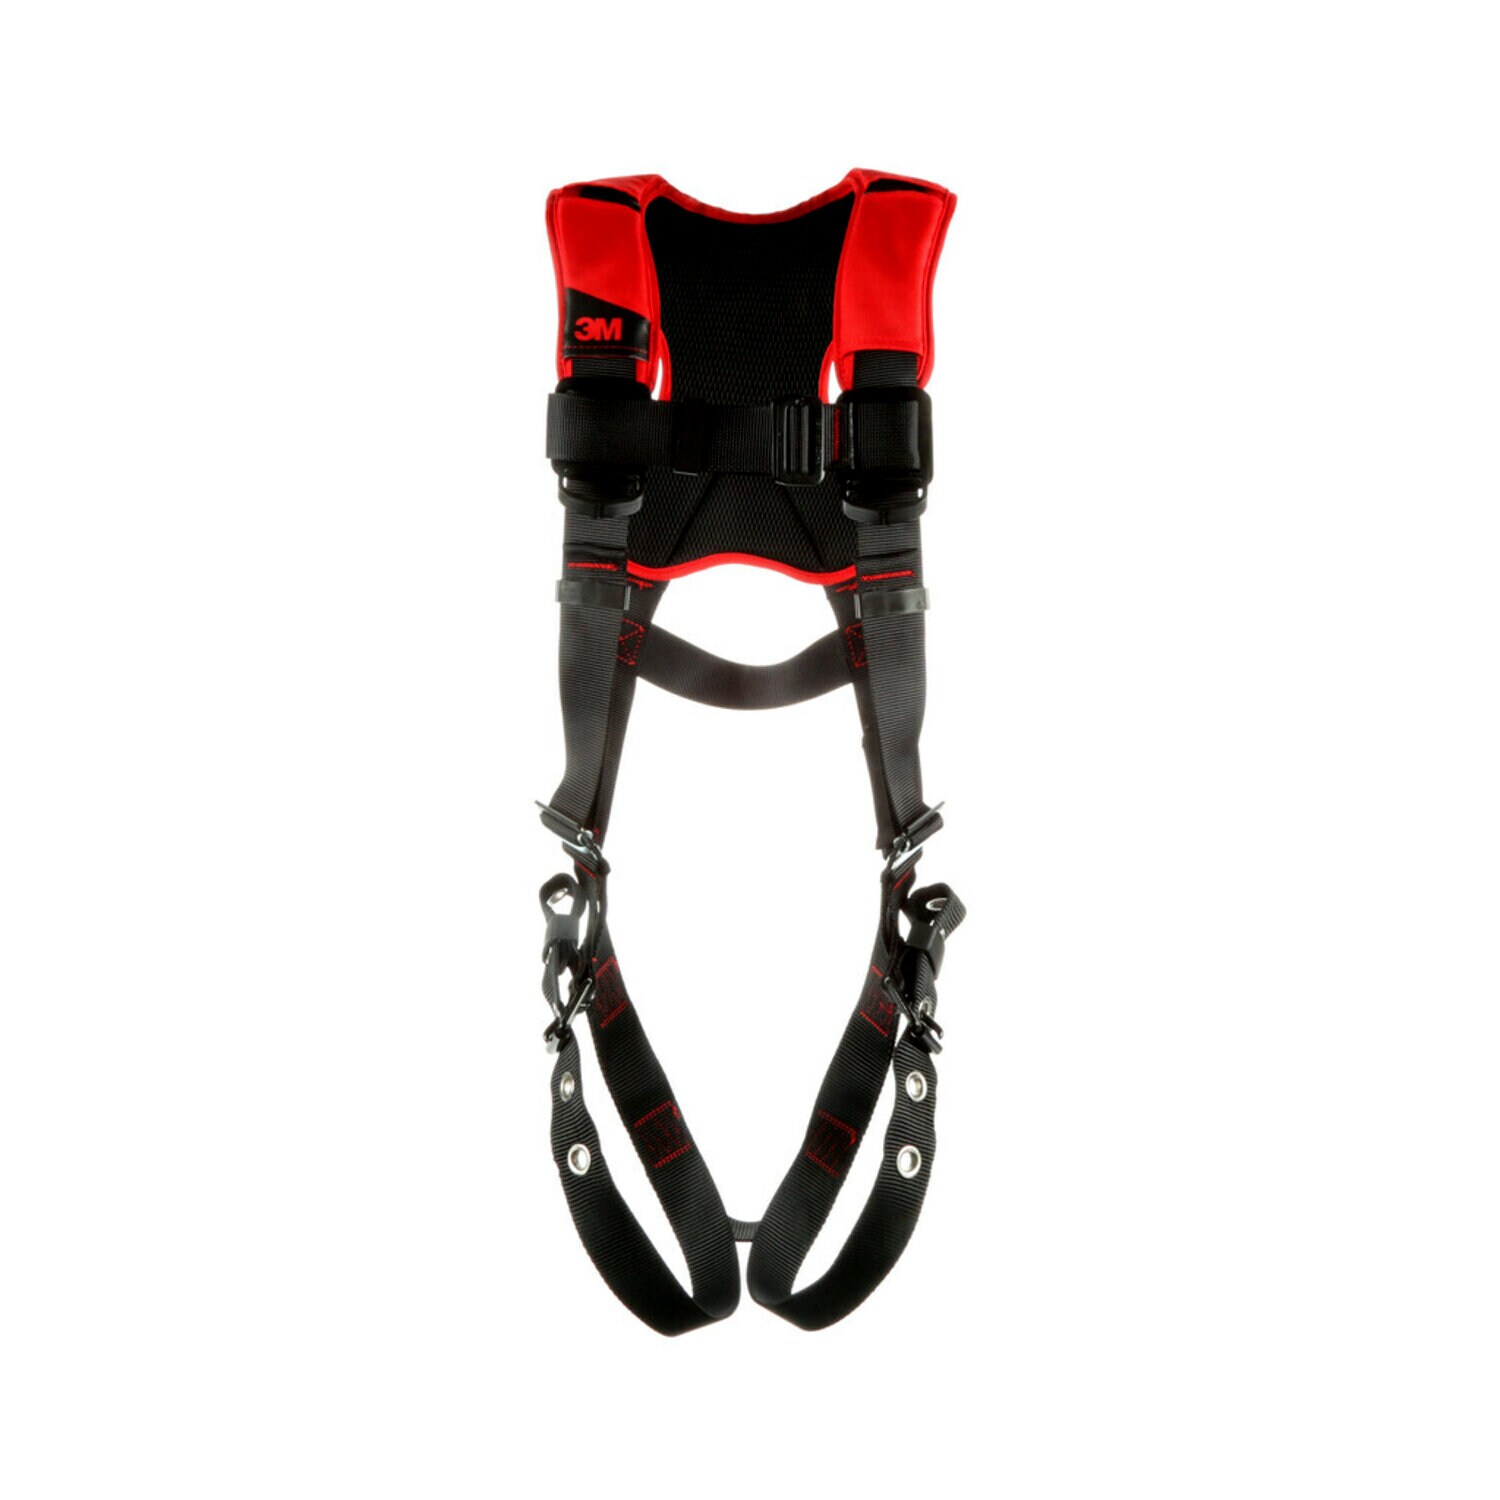 7012816688 - 3M Protecta P200 Comfort Vest Safety Harness 1161417, Small